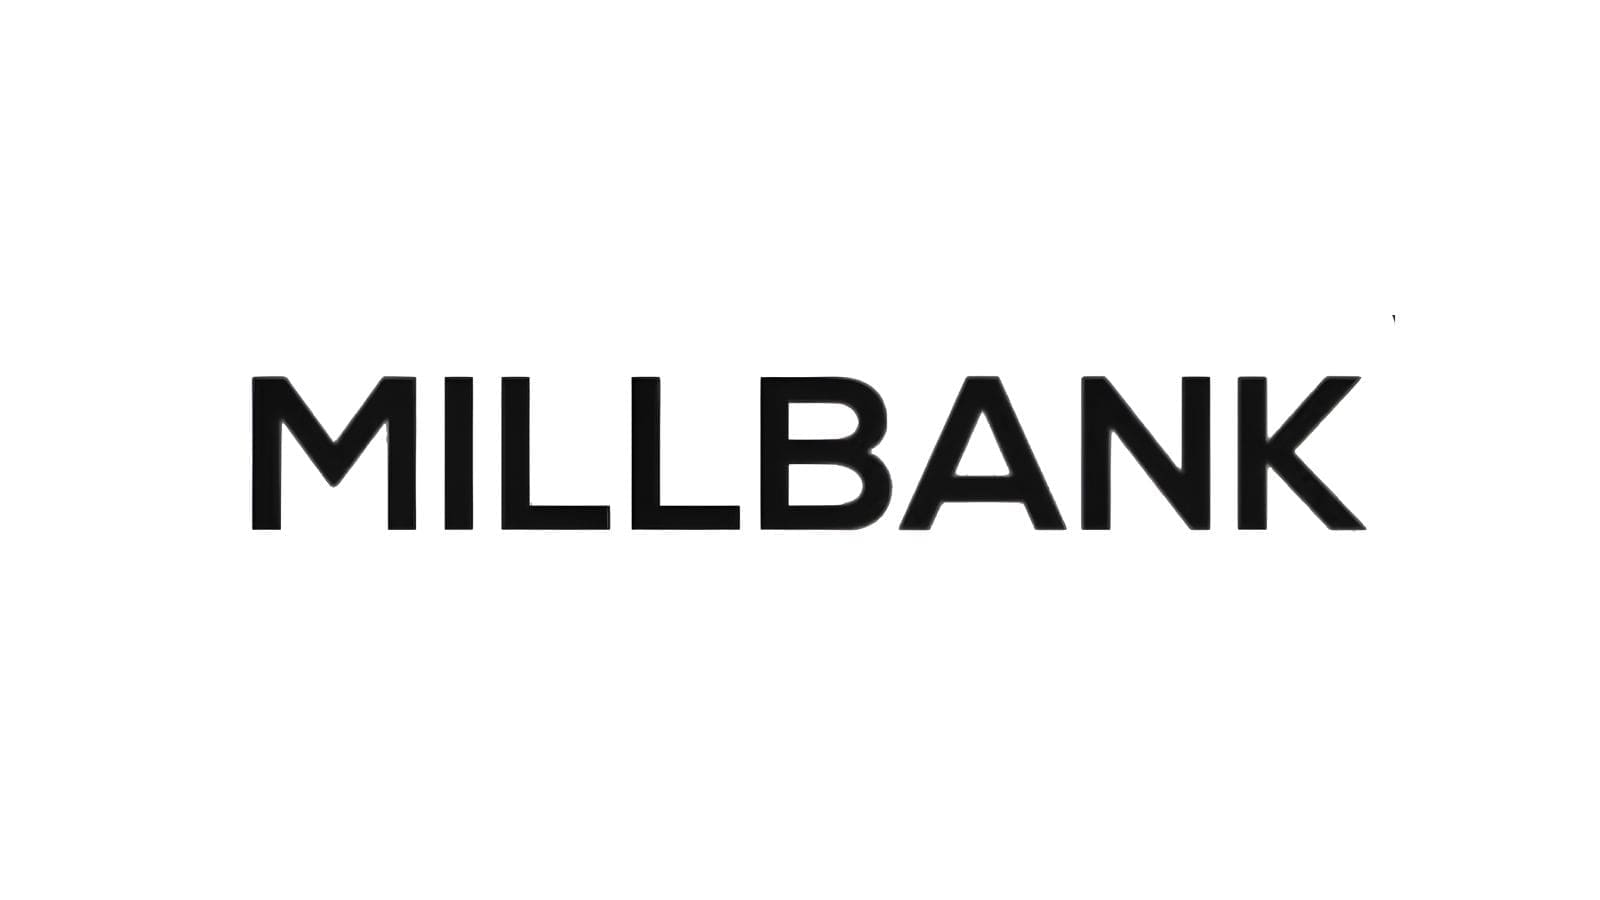 The word "Millbank" in black.